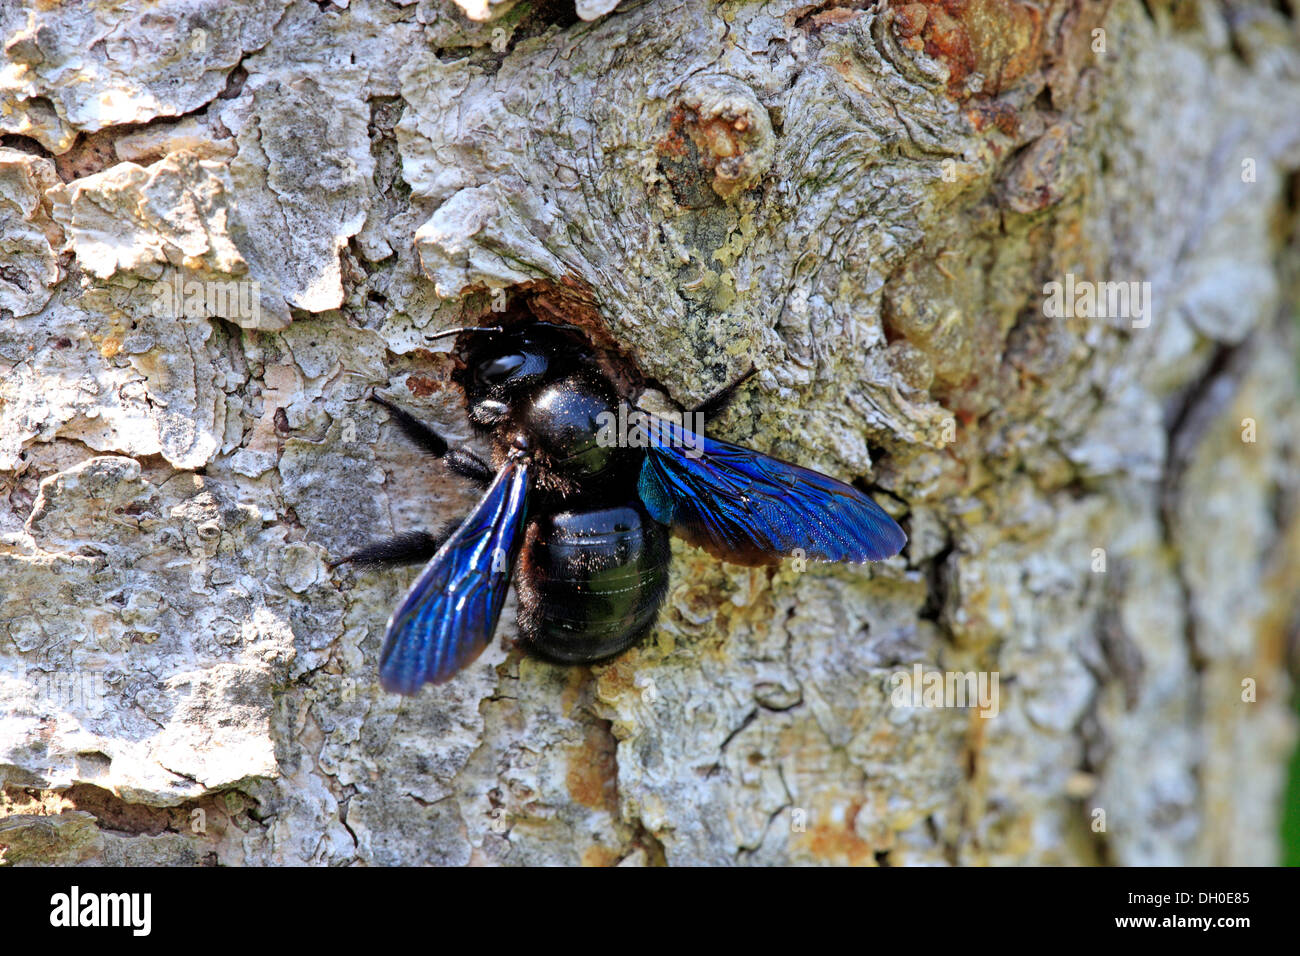 Large Violet Carpenter Bee (Xylocopa violacea) at its nest, Ellerstadt, Rhineland-Palatinate, Germany Stock Photo